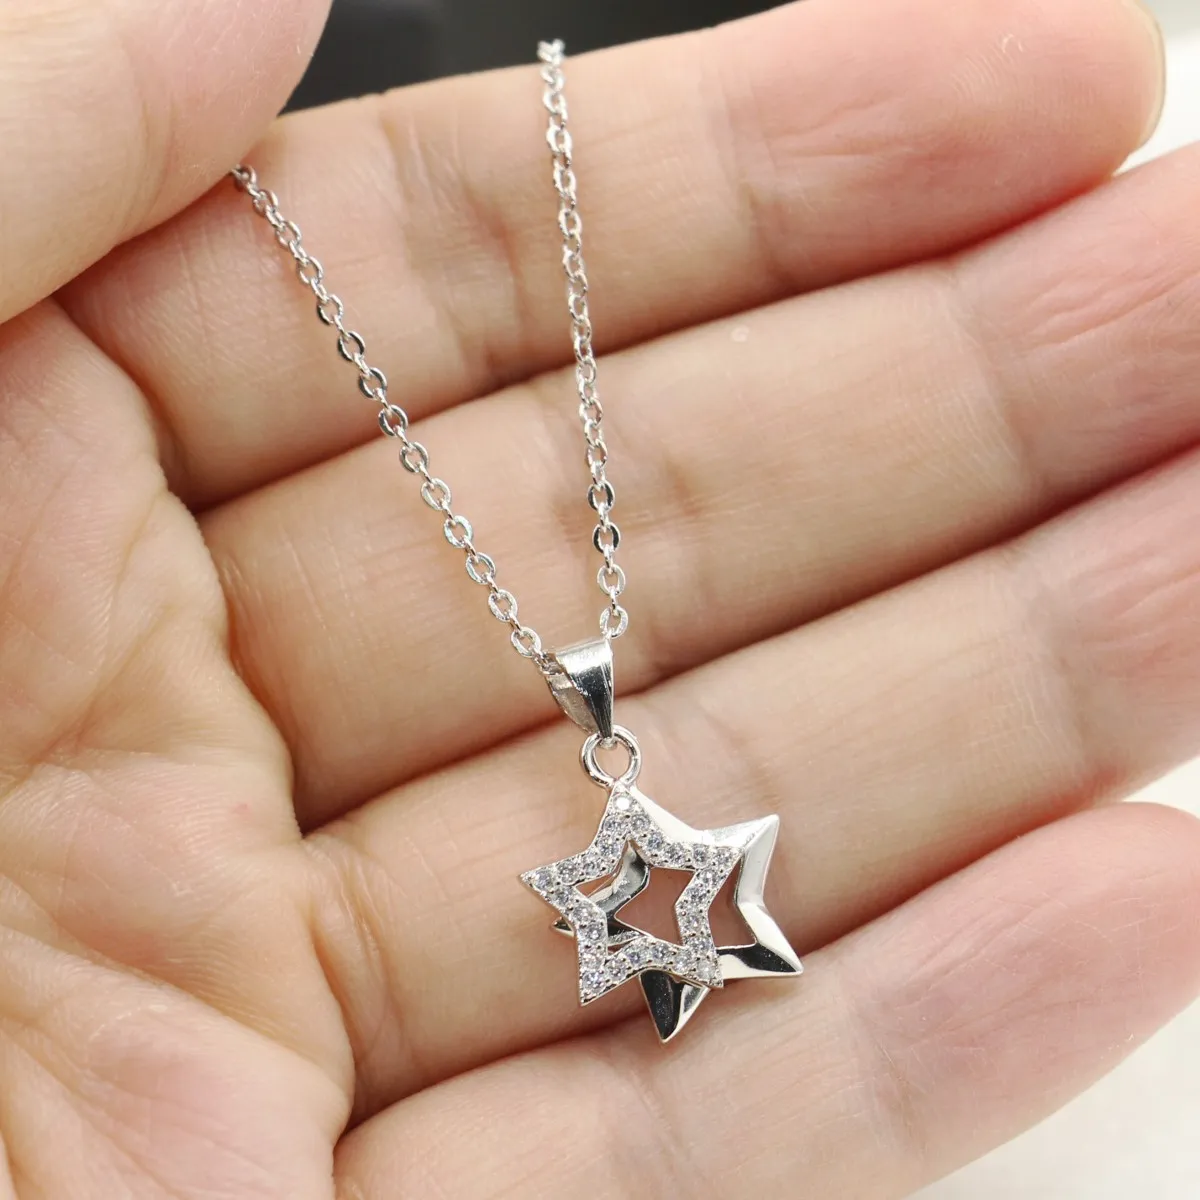 Double Star Necklace Original Desgin Luxury Jewelry 925 Sterling Silver Pave White Sapphire CZ Diamond Party Promise Pendant For Women Gift